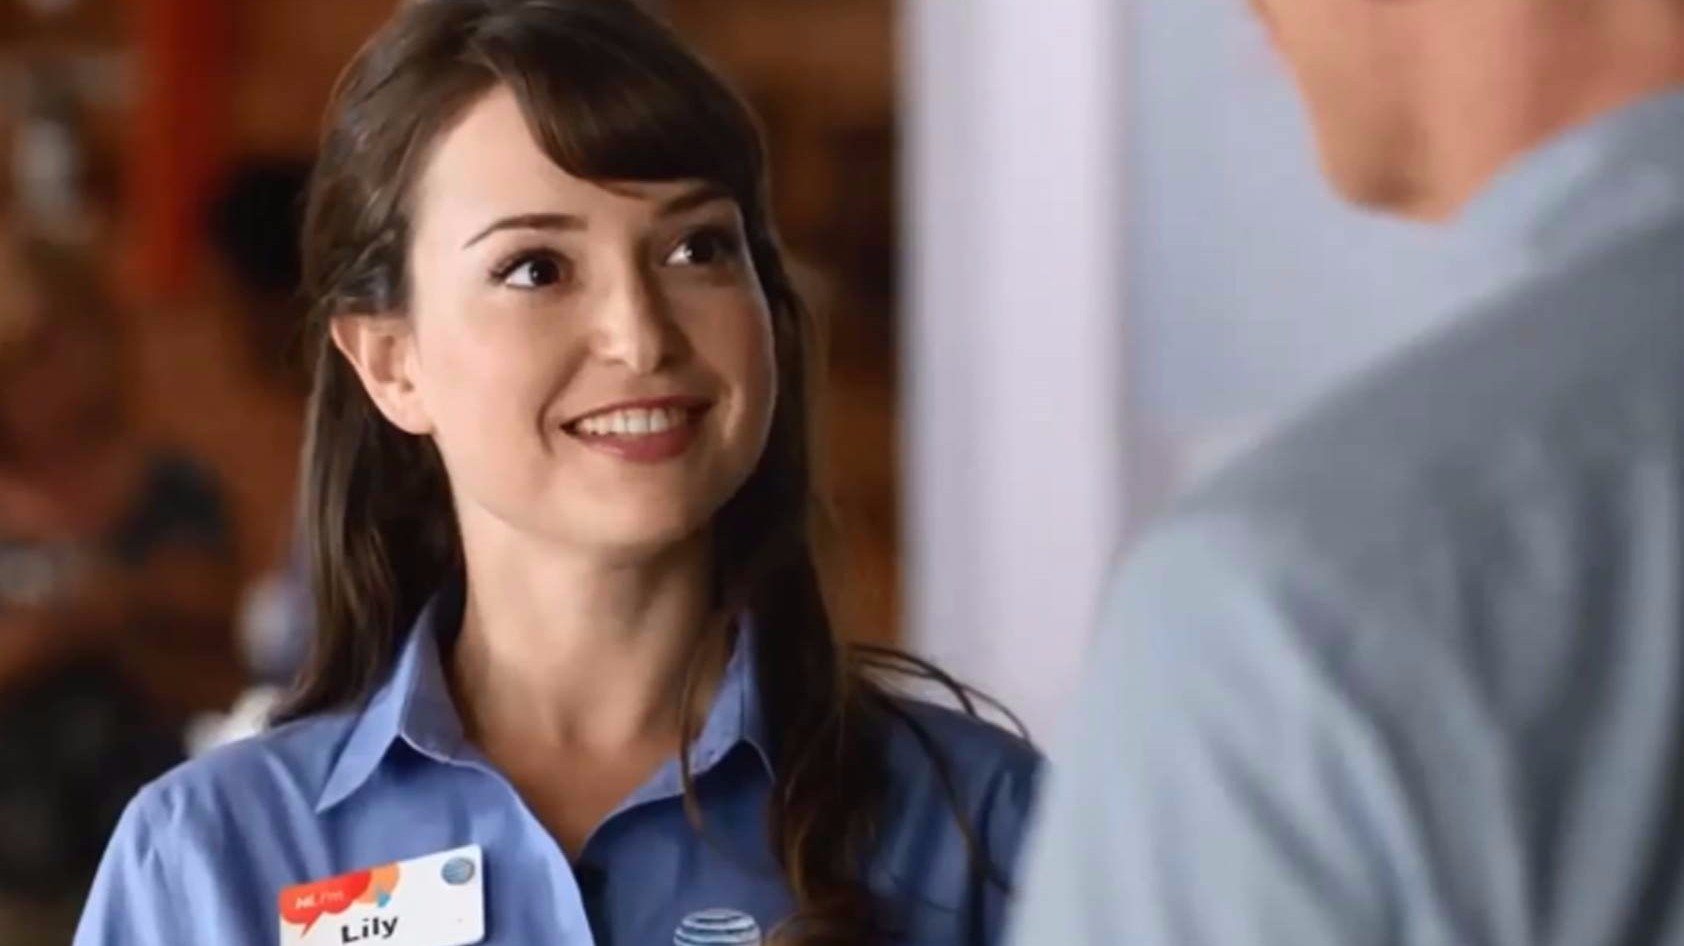 Milana Vayntrub — 'Lily' from those AT&T ads — has a message for Syrian